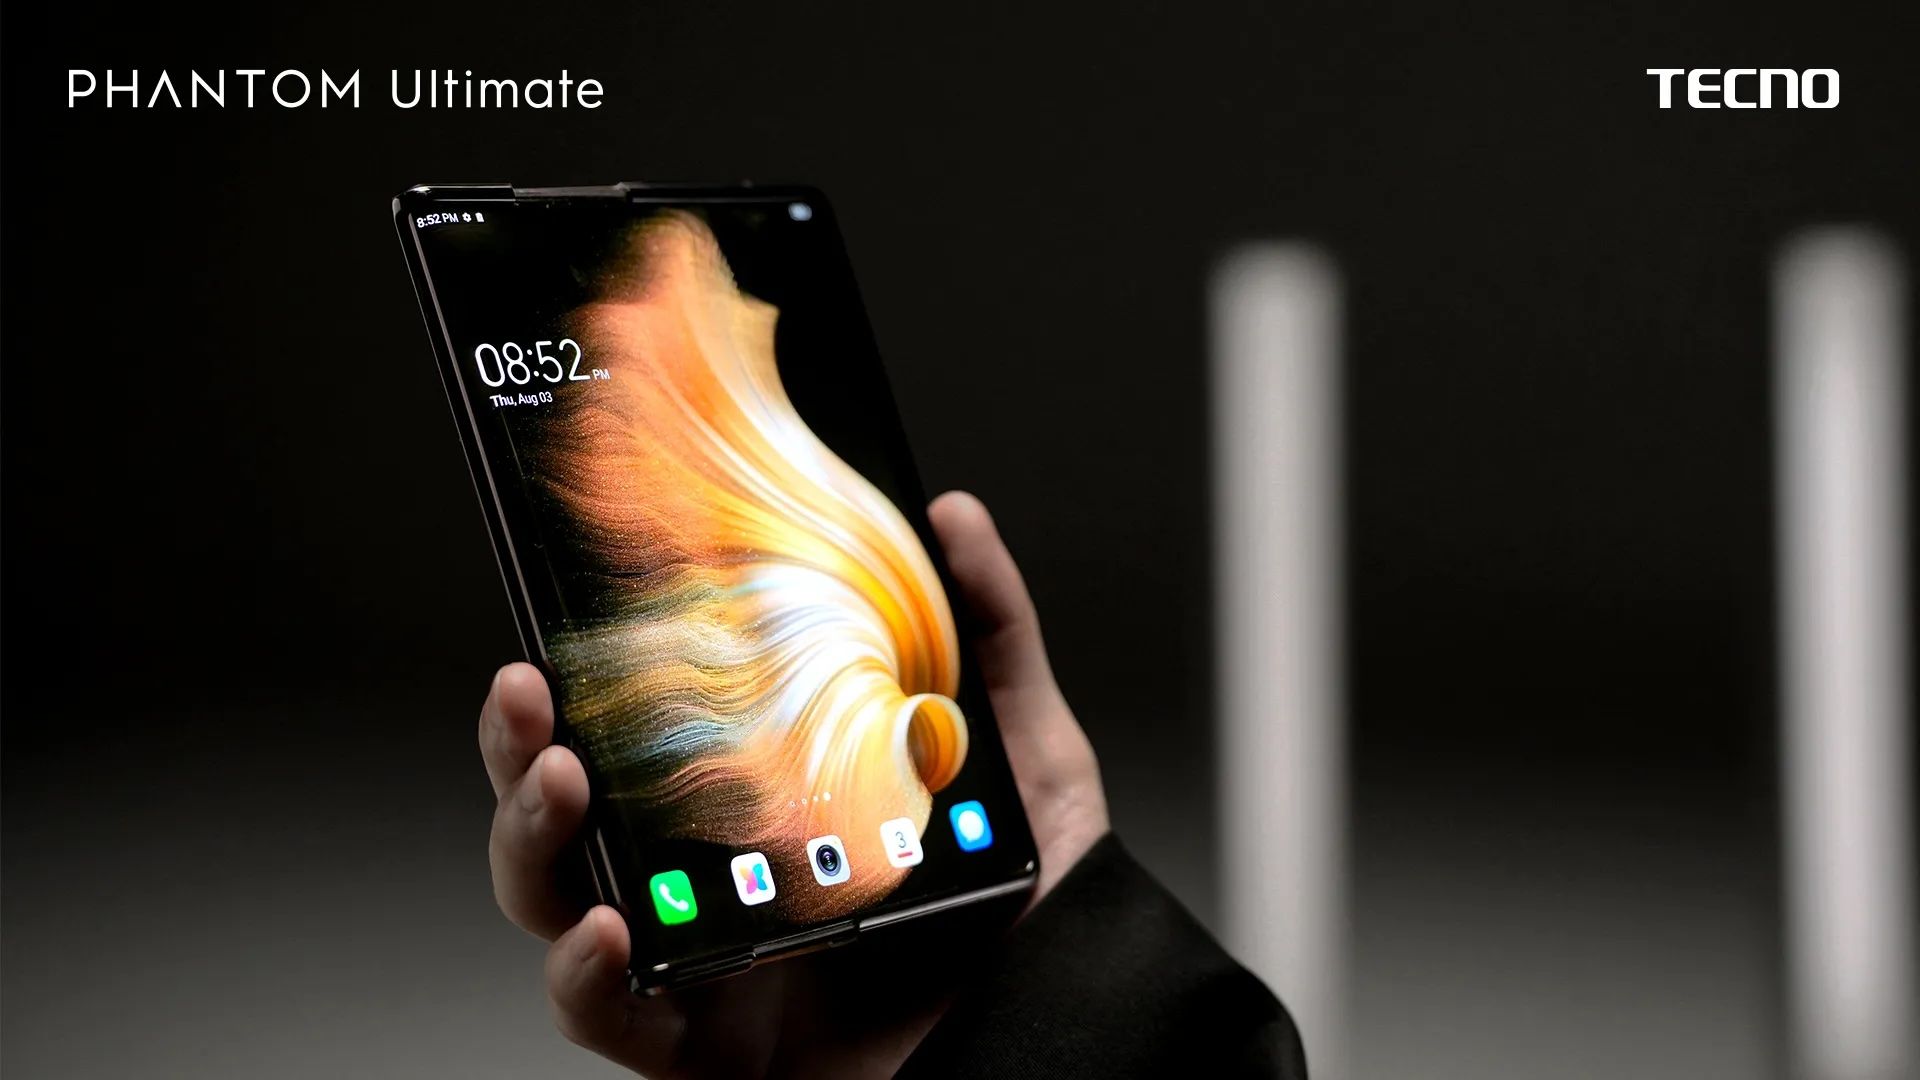 The Phantom Ultimate 3 rollable phone held in a hand.